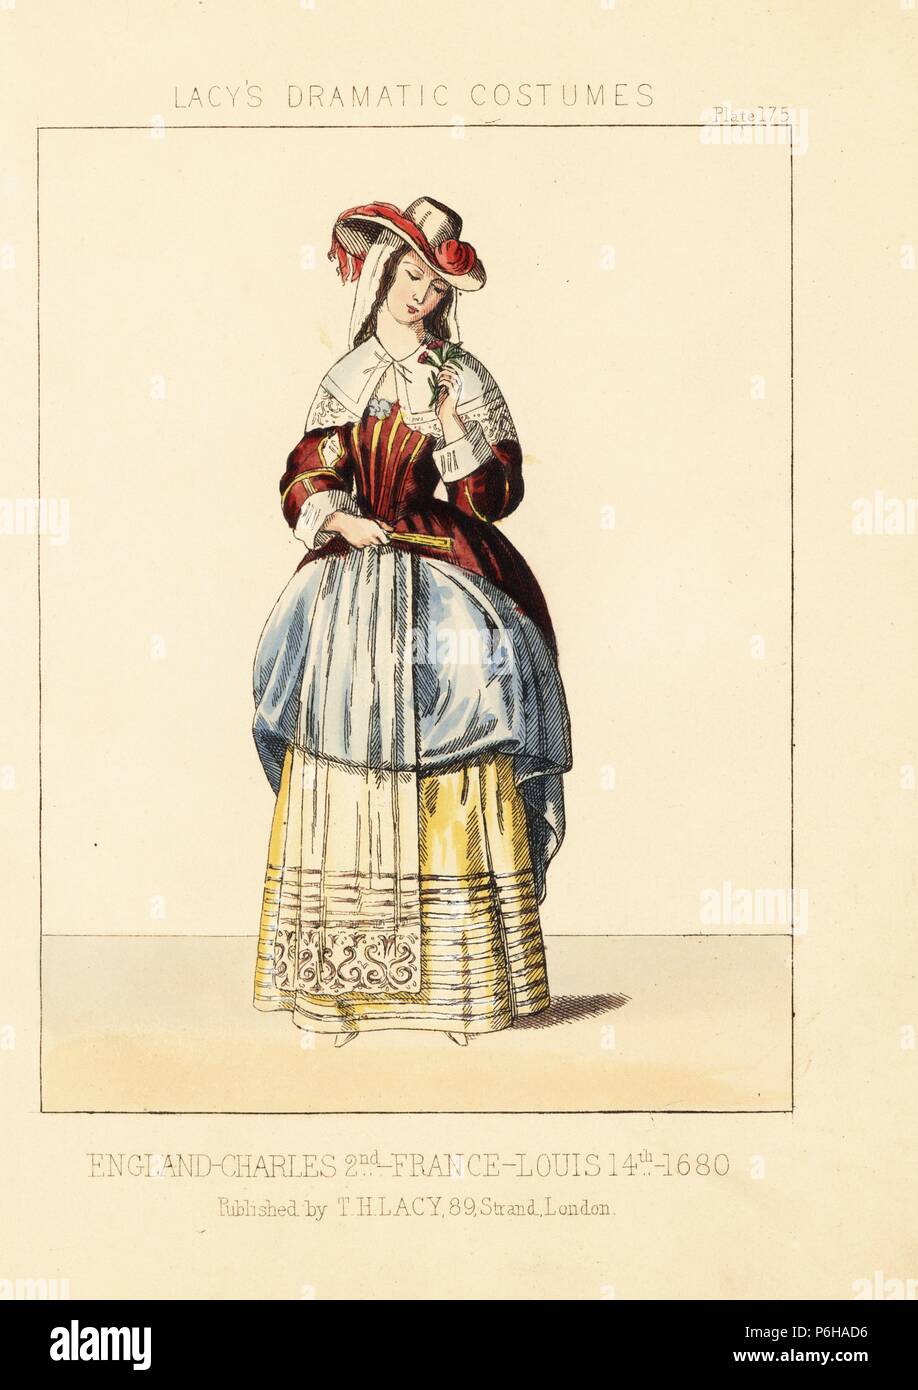 Costume of a lady, reign of King Charles II, England, 1680. She wears a hat  over veil, lace collar, velvet robe with skirts tied up to reveal lace  apron and petticoats. Handcoloured